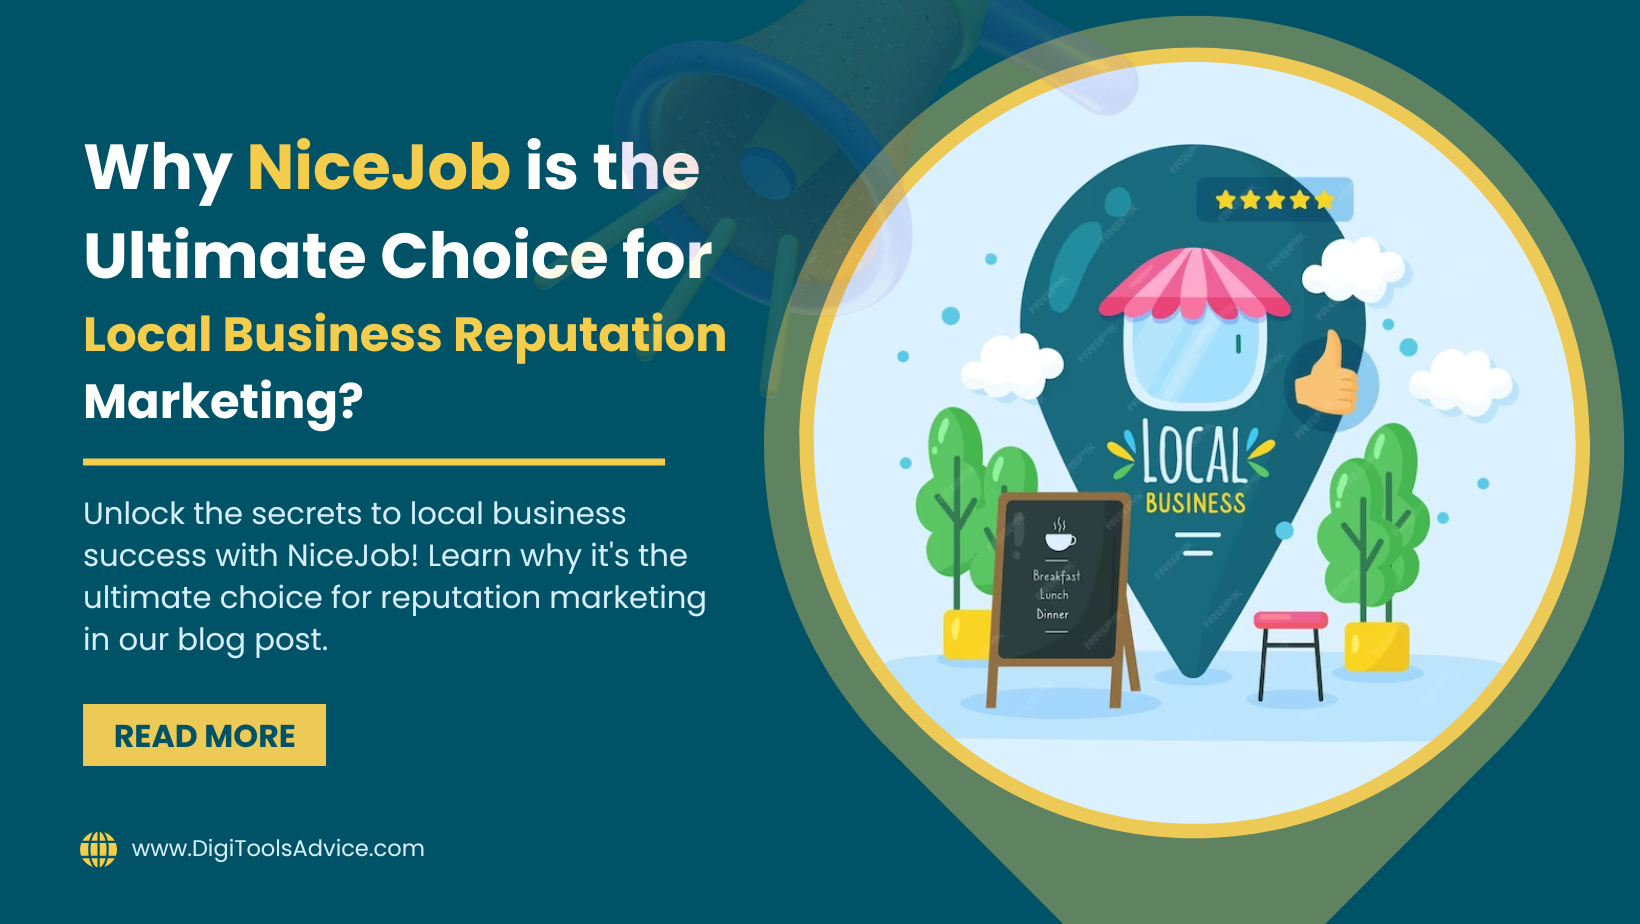 Why NiceJob is the Ultimate Choice for Local Business Reputation Marketing?